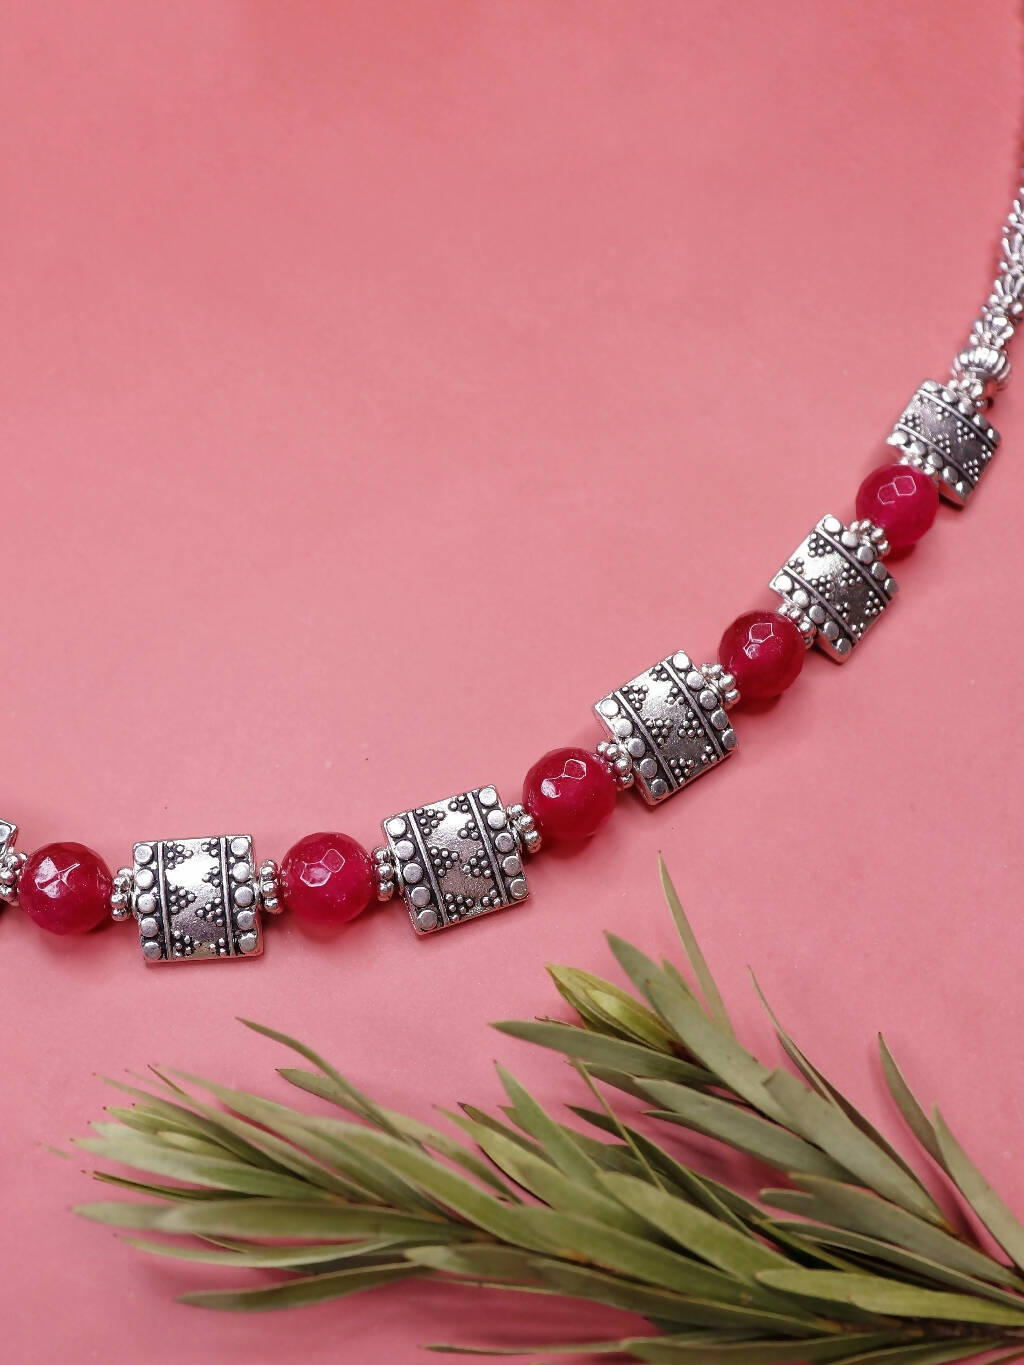 Handmade German silver silver look alike evening, dinner, party Necklace Set with Red Glass beads-RATNA Wemy Store